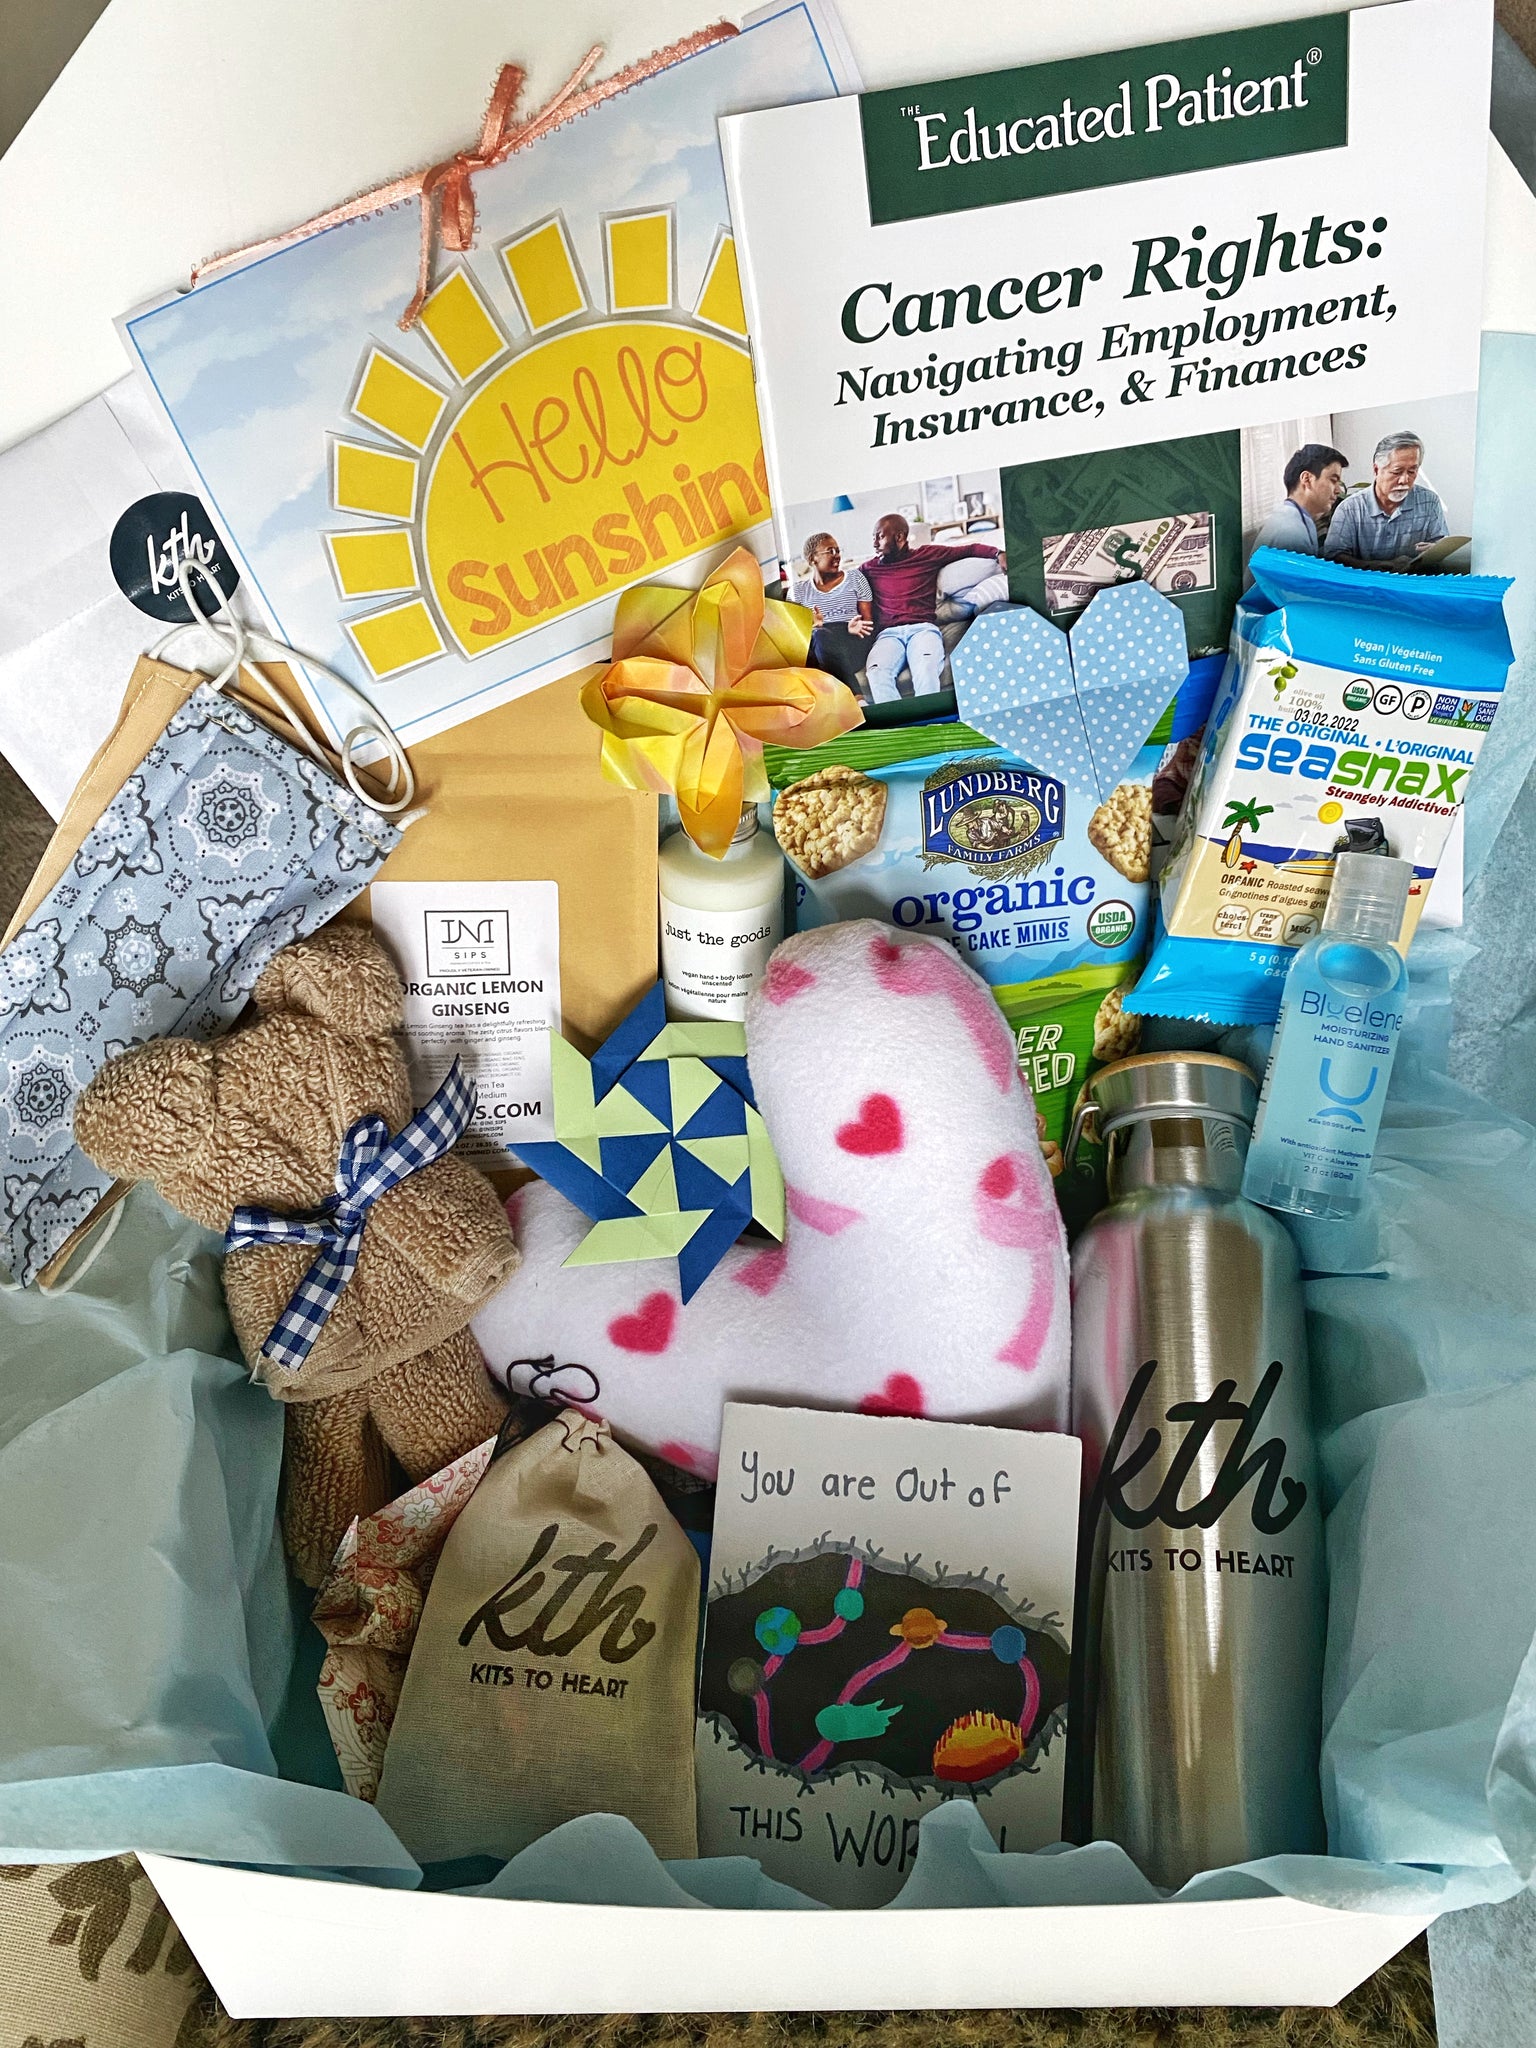 Cancer Care Kit: Give What You Can! – Kits to Heart